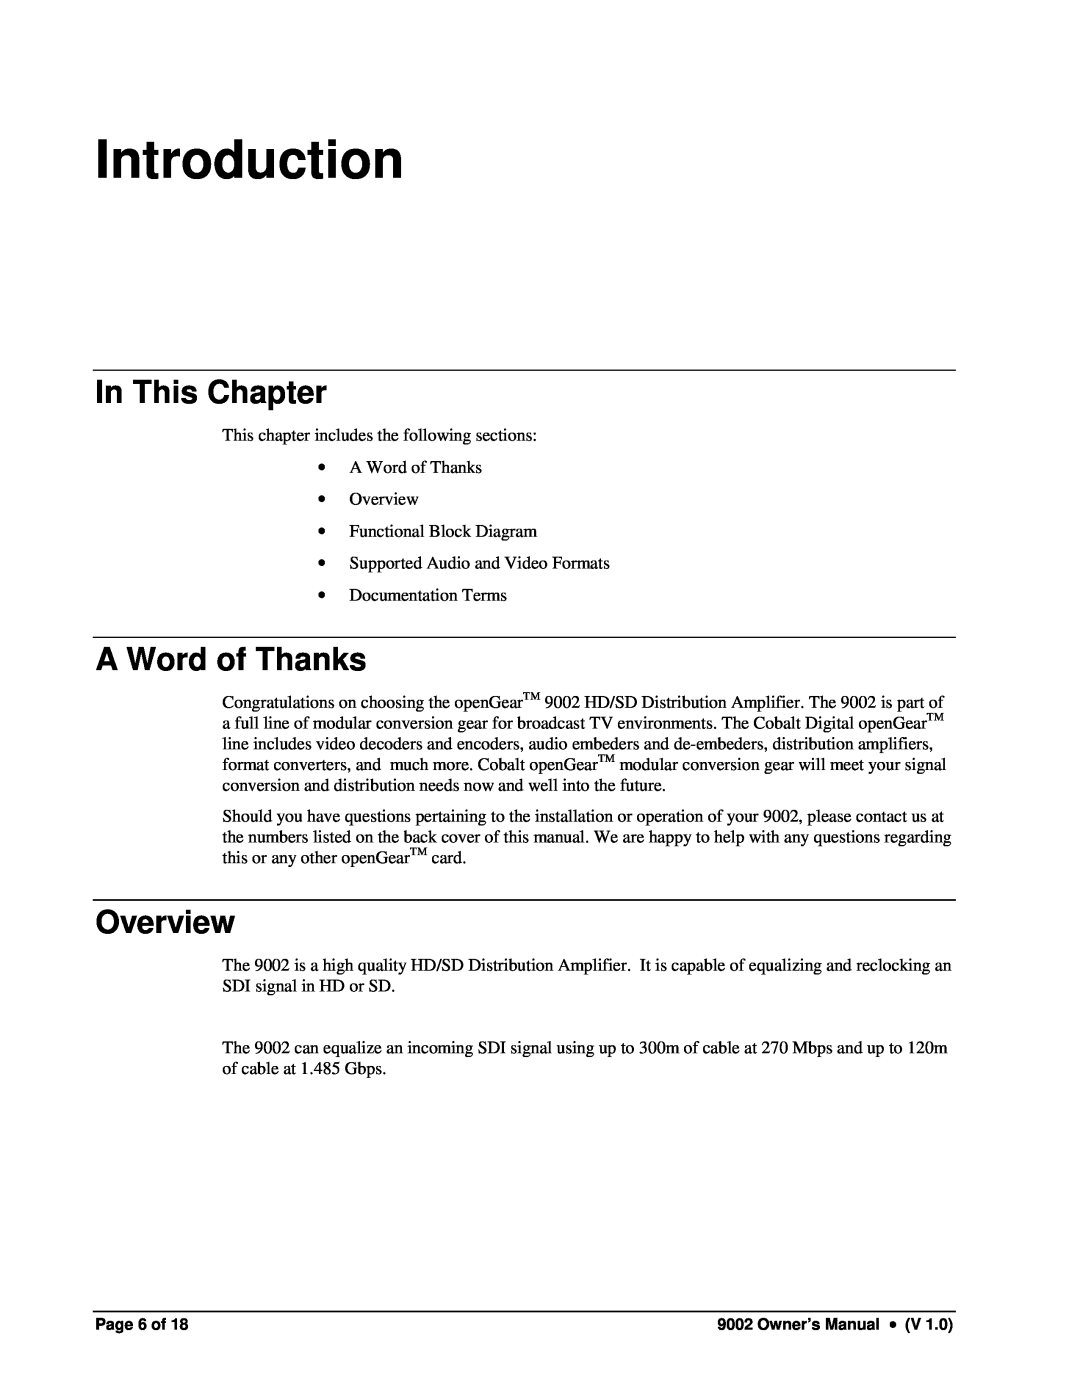 Cobalt Networks 9002 owner manual Introduction, In This Chapter, A Word of Thanks, Overview 